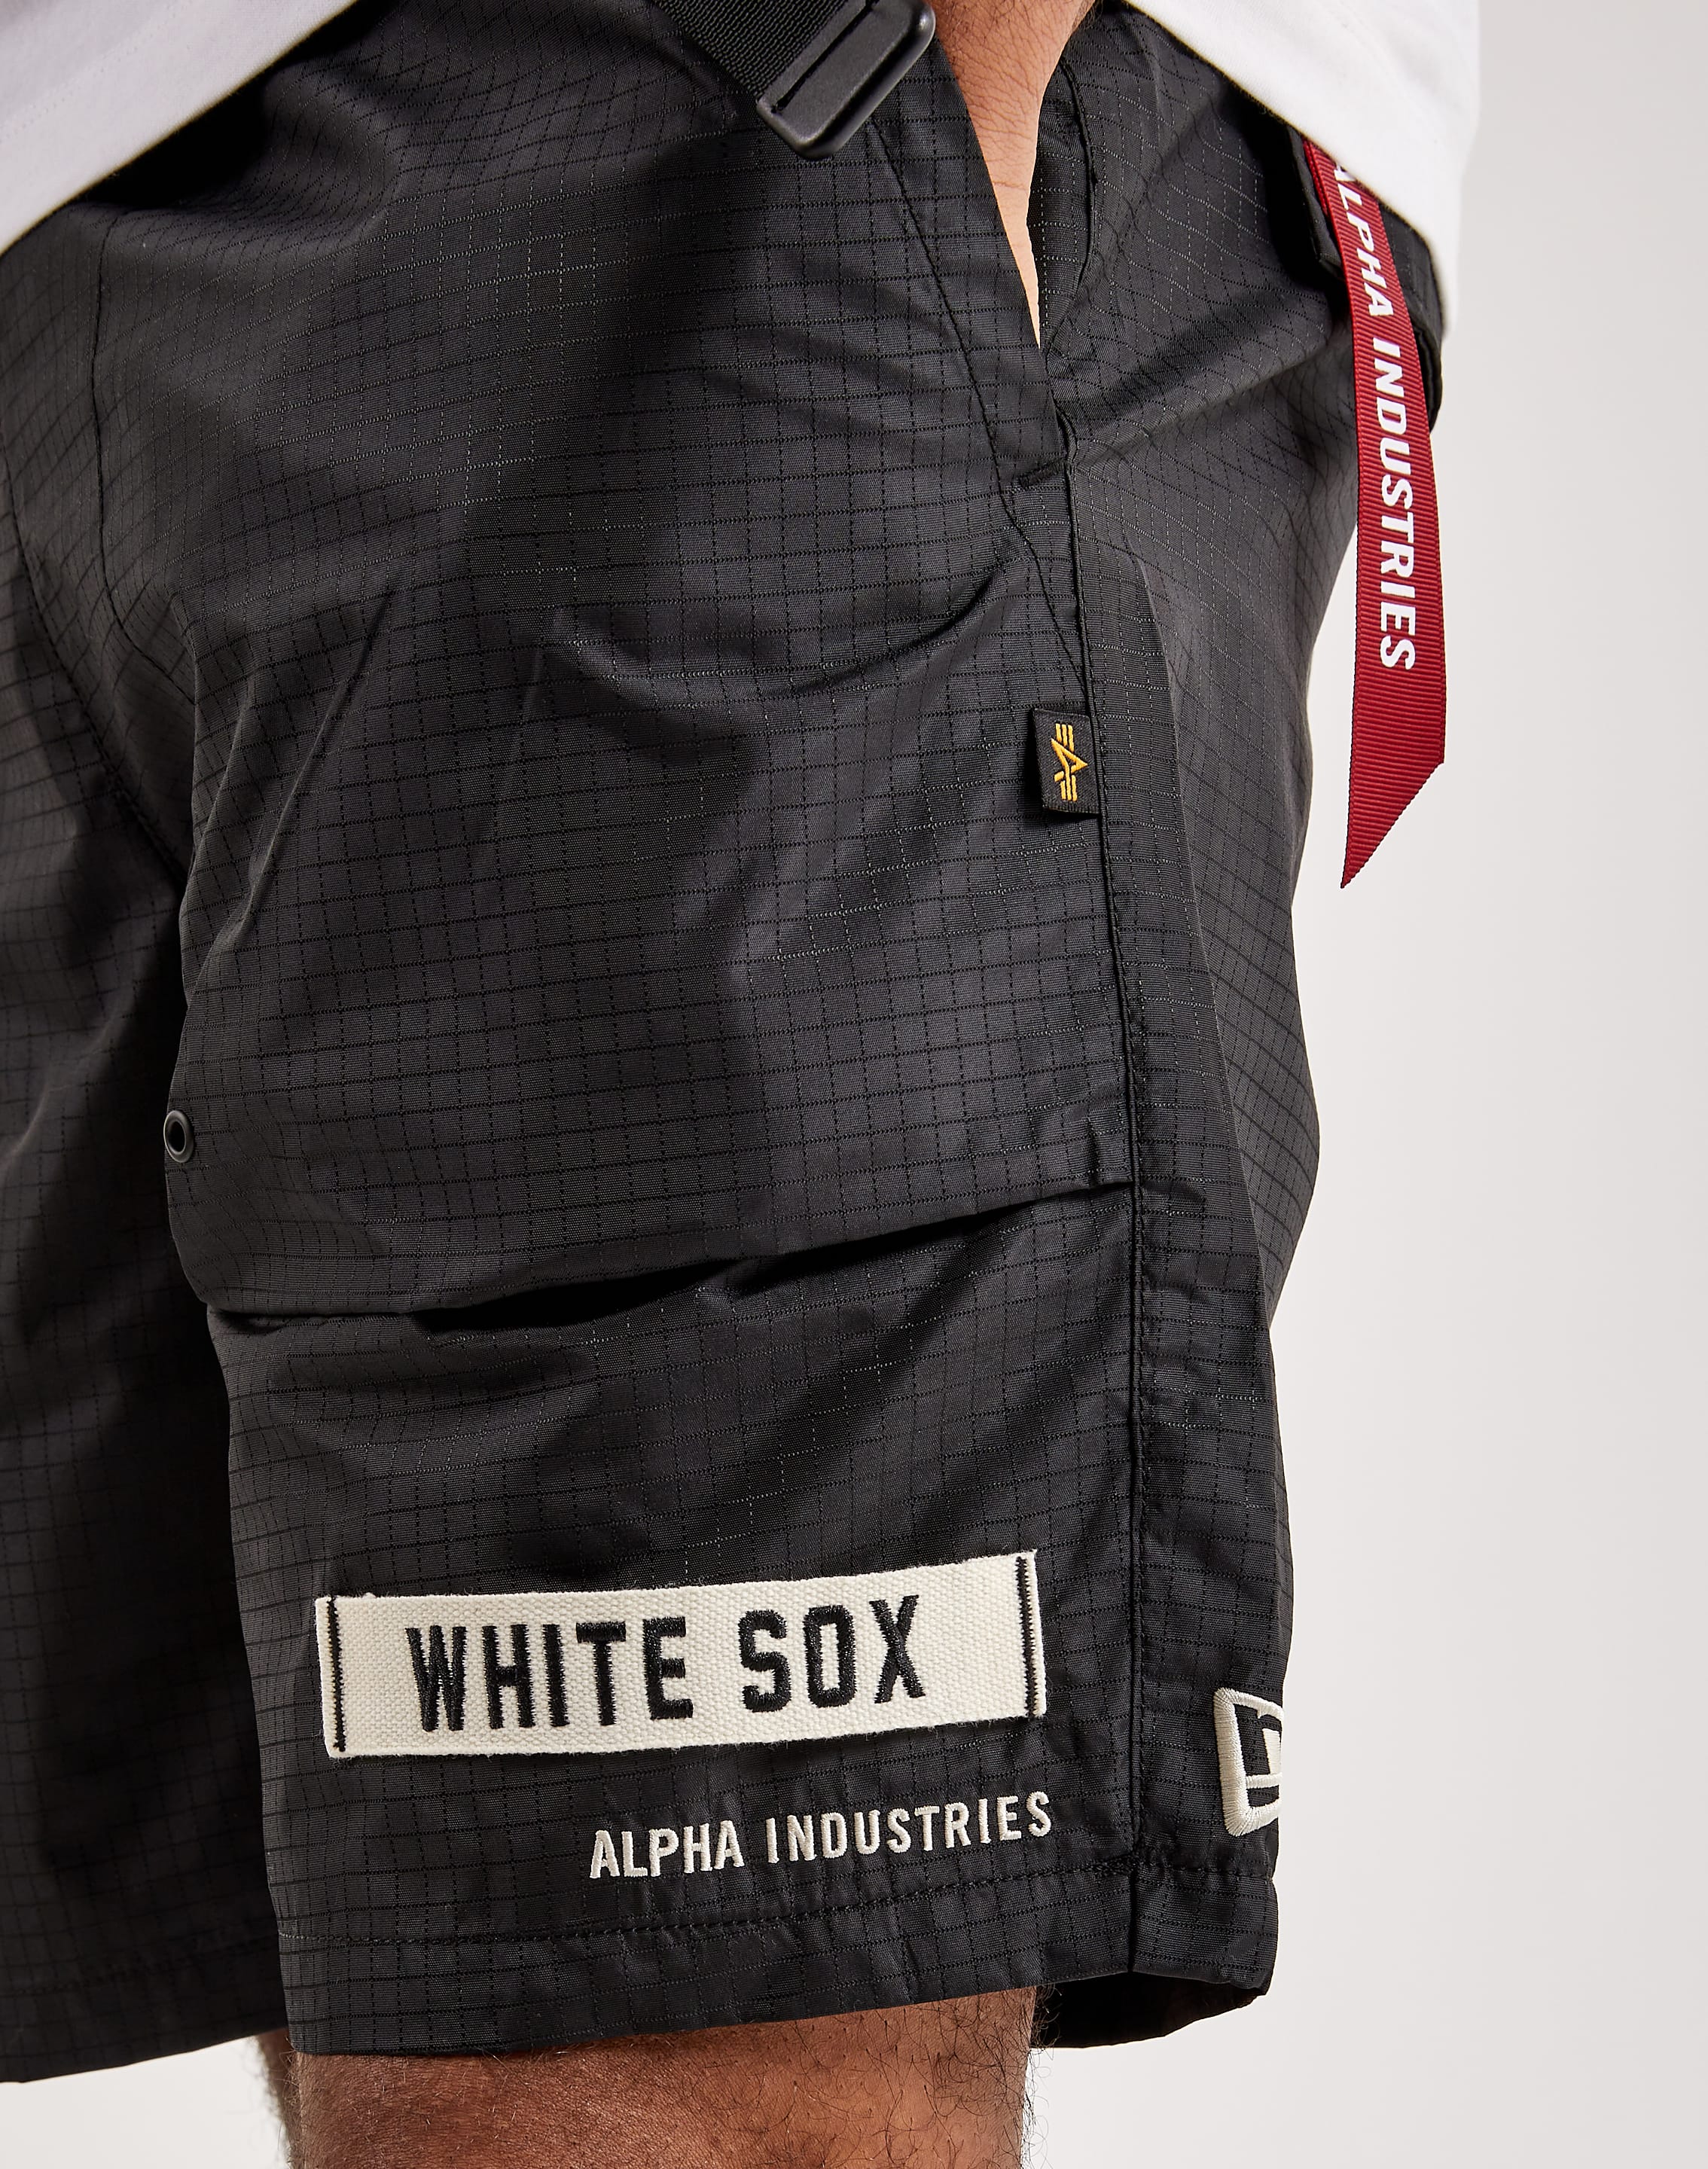 Alpha Industries Chicago White – Shorts DTLR Sox